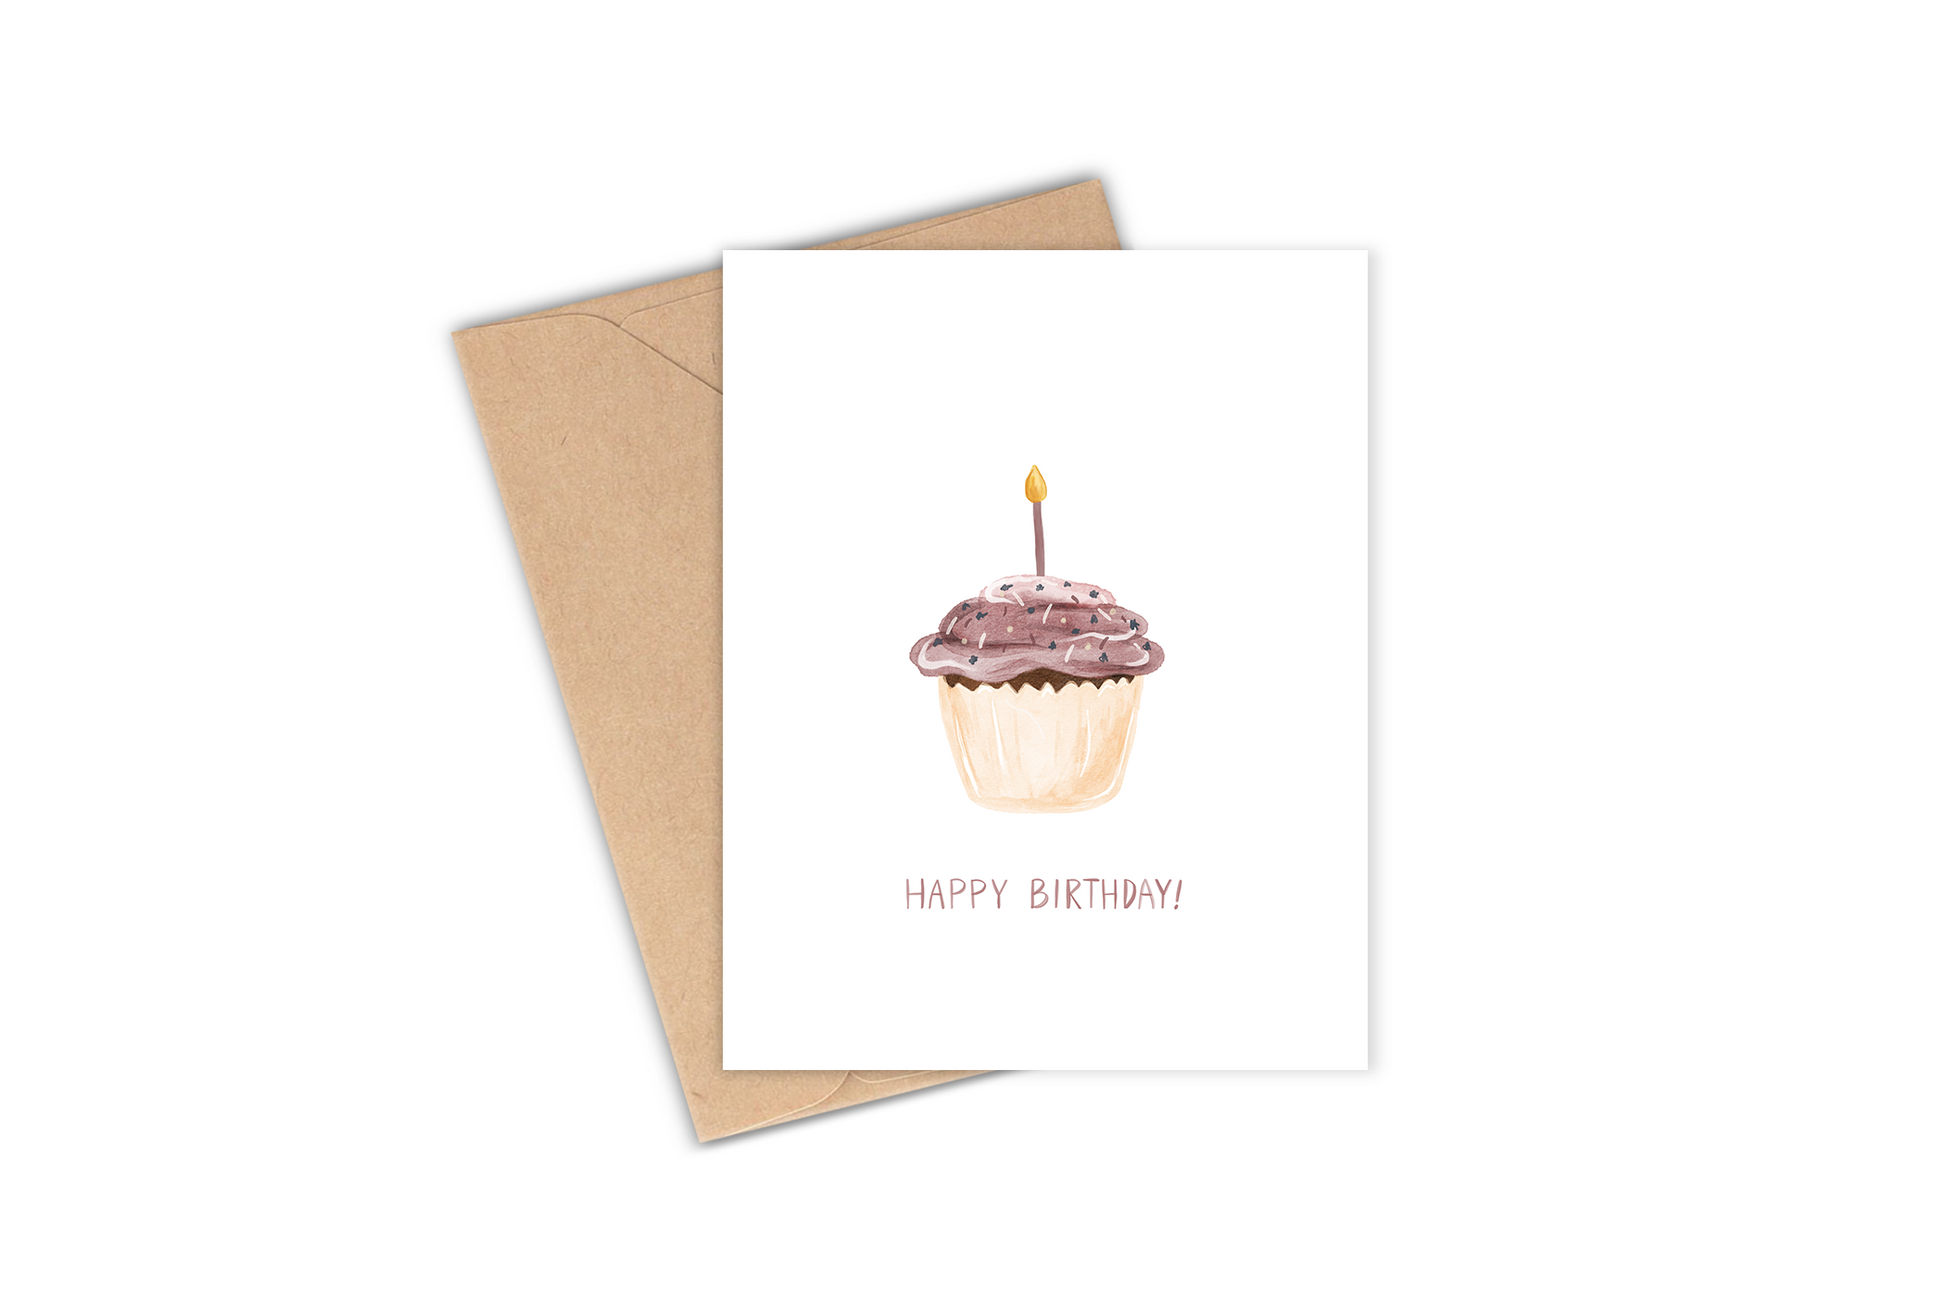 This greeting card features a drawing of a delicious looking cupcake with the phrase "Happy Birthday". Perfect for your friend who loves sweet treats because we all deserve a little treat!